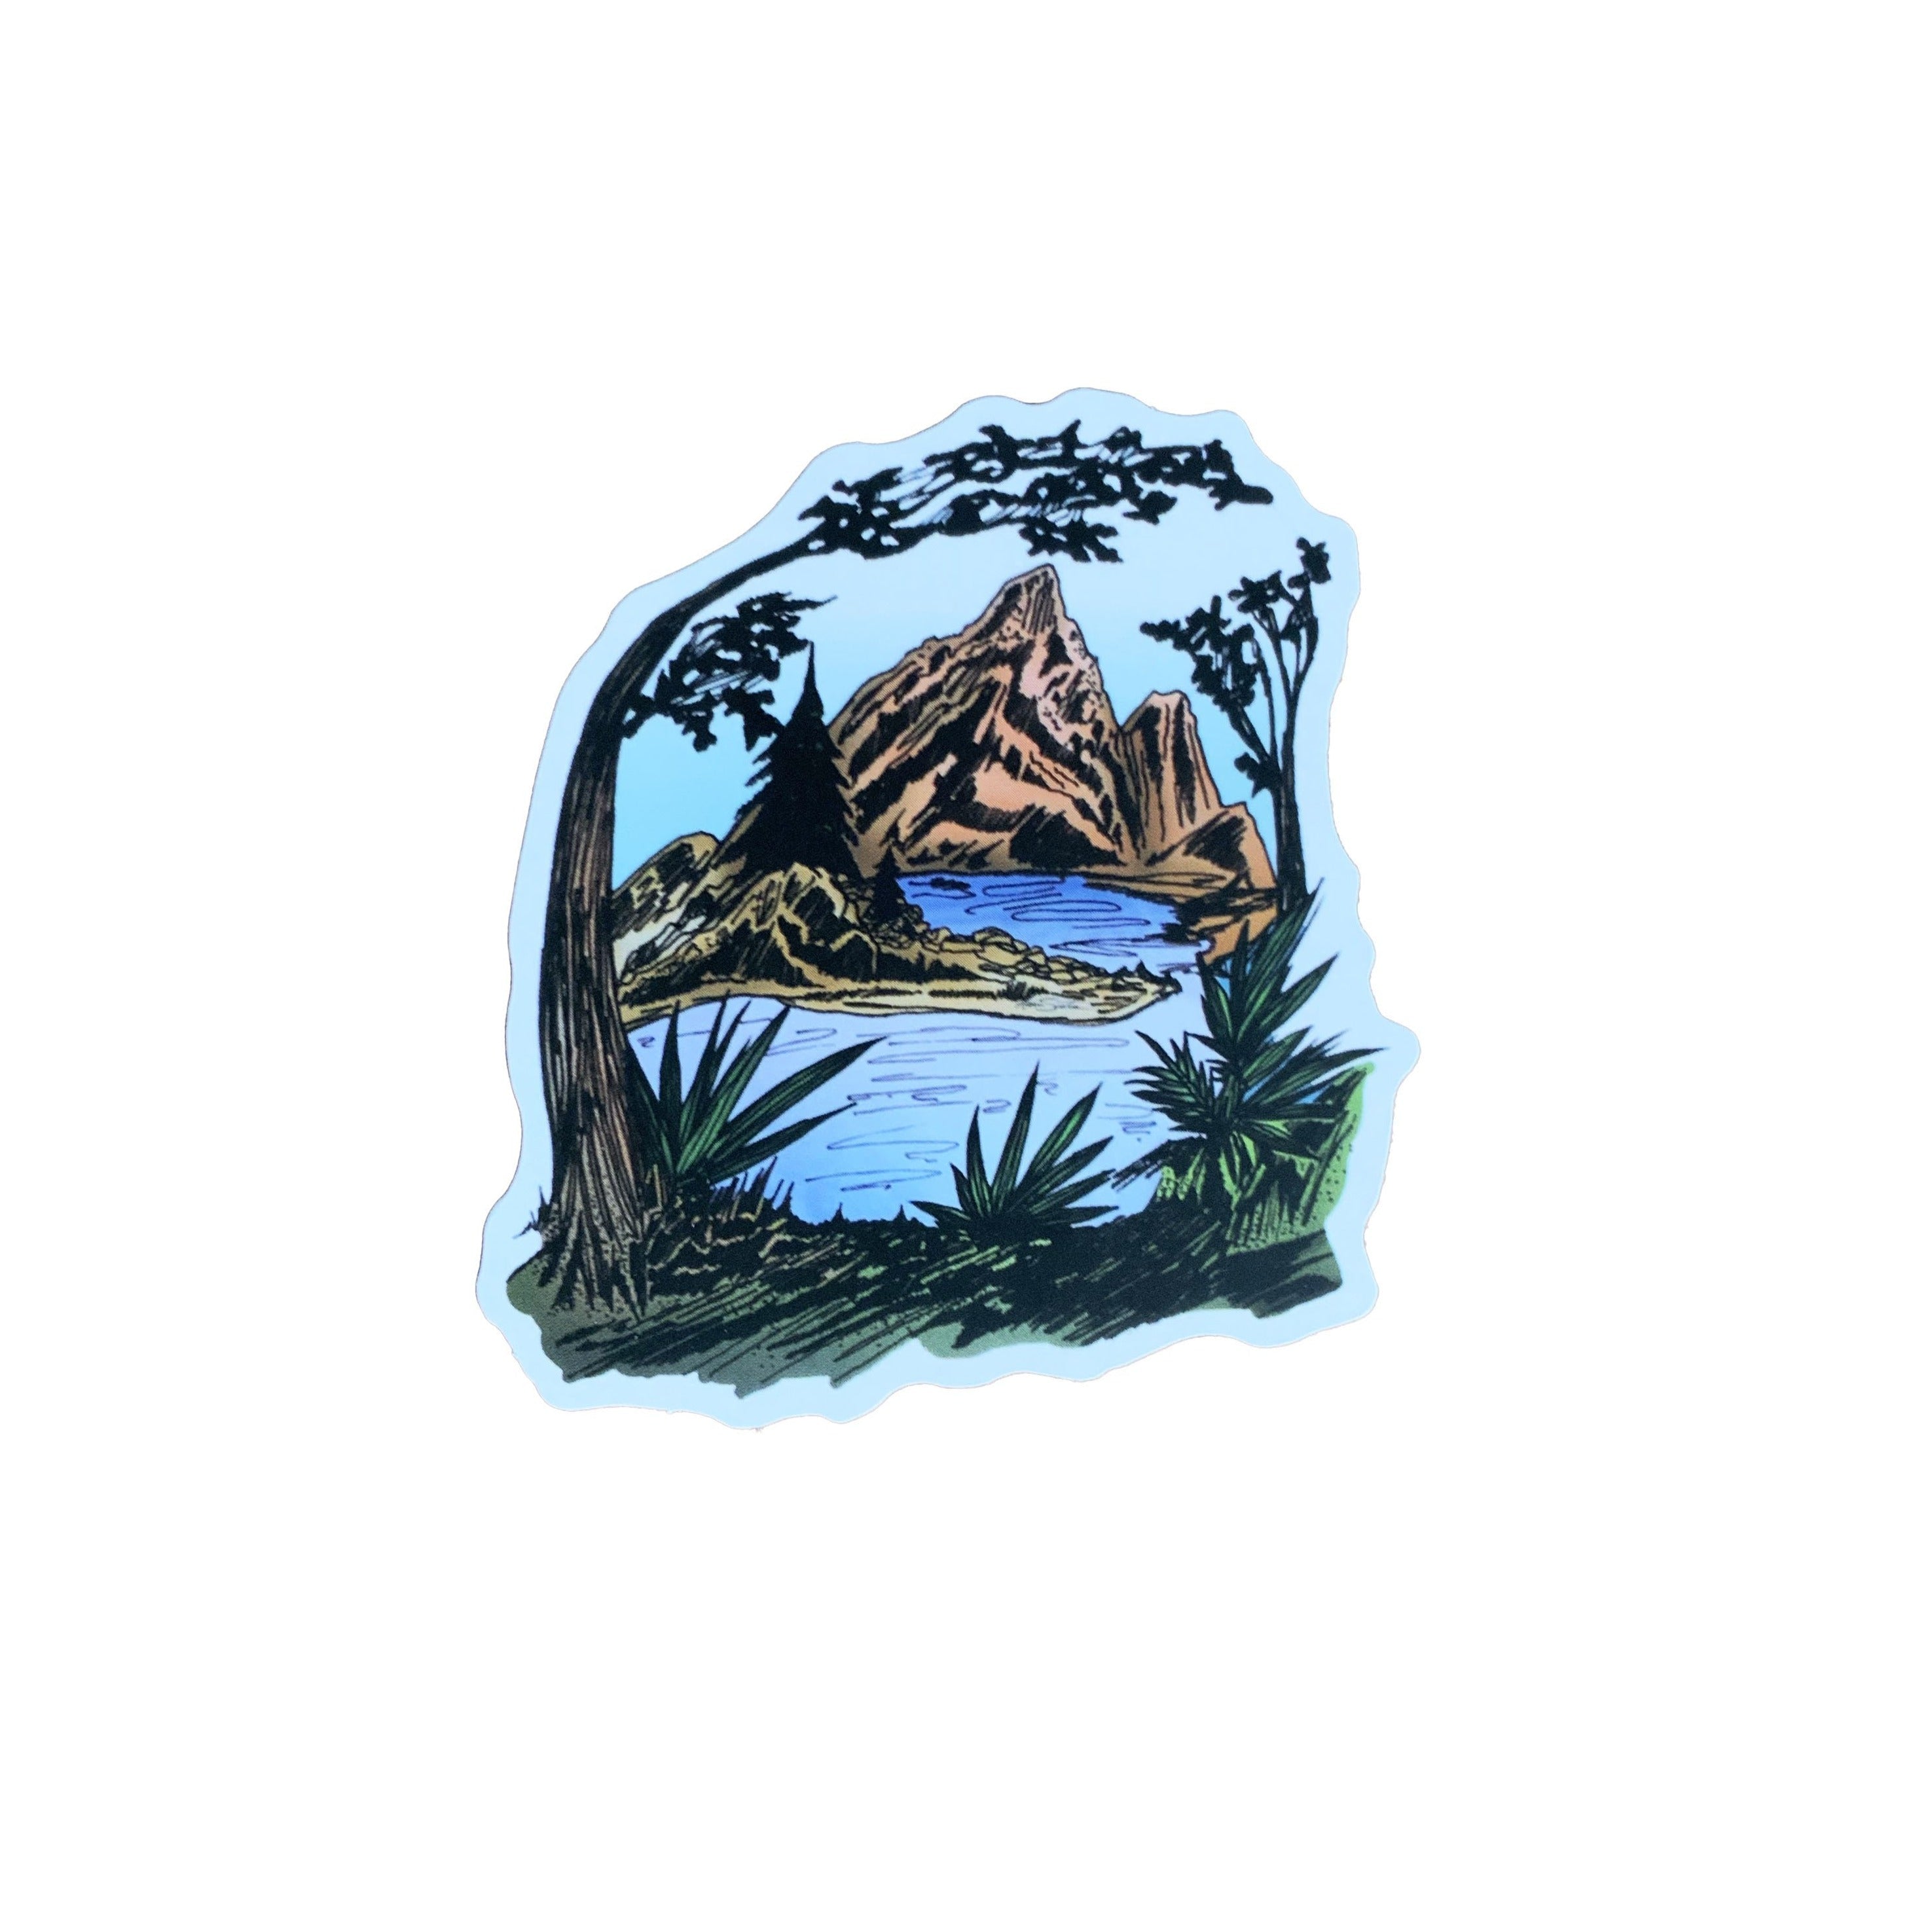 Secluded Island Sticker, sticker, Pacific Rayne, Defiance Outdoor Gear Co.